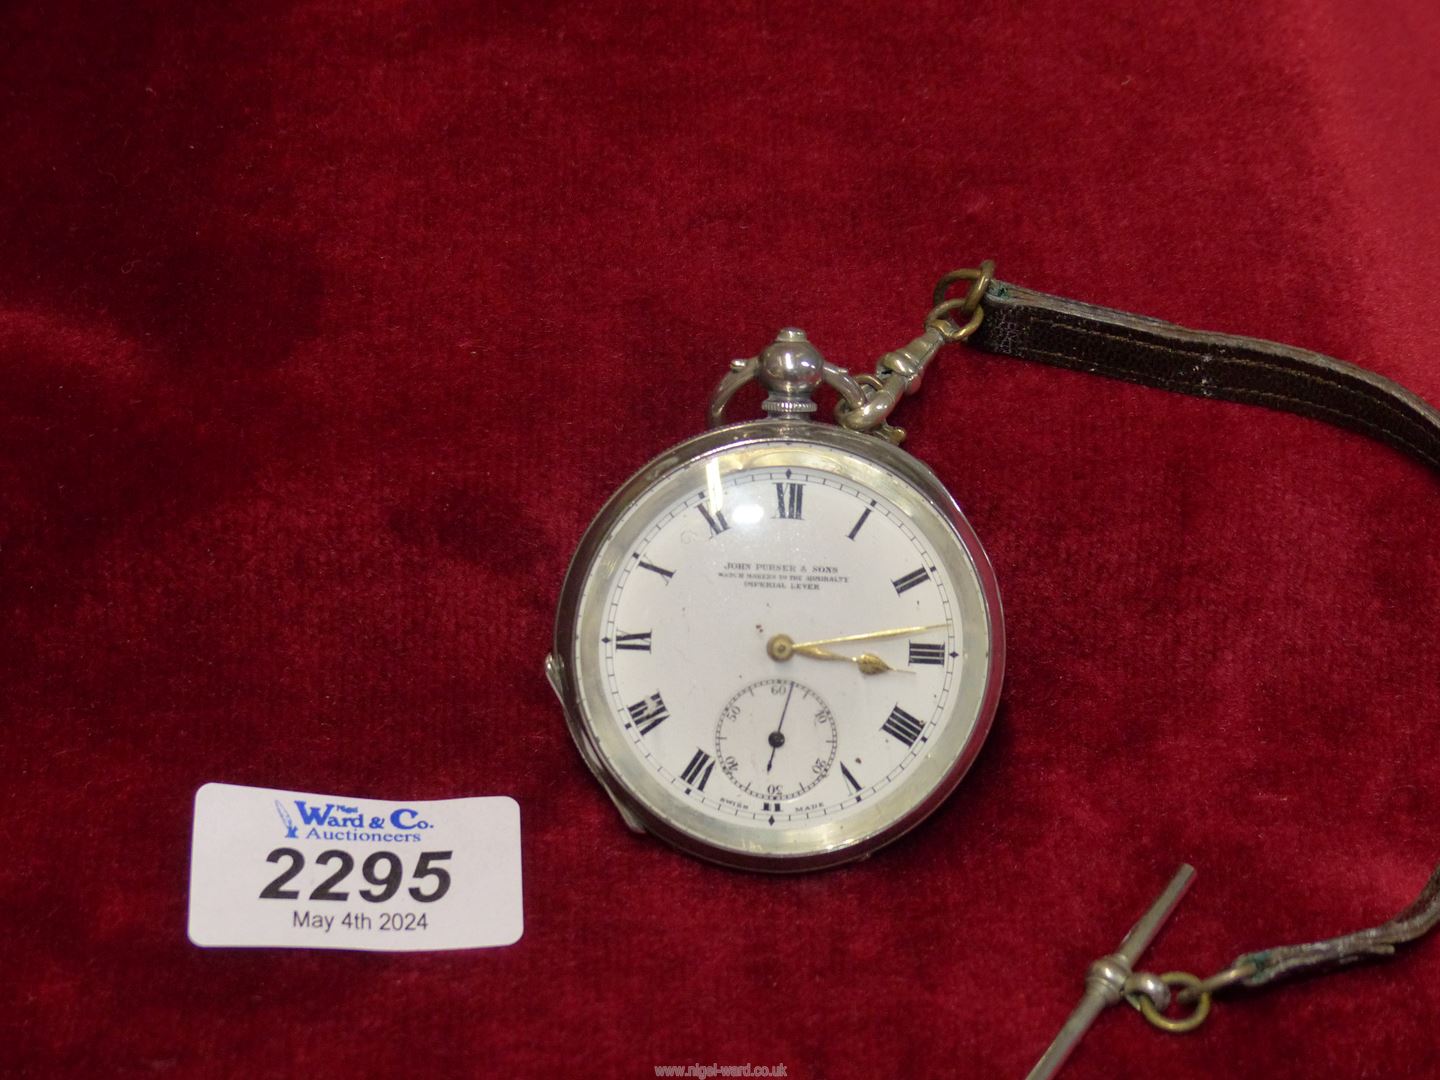 A Swiss made 925 silver cased Imperial Lever Pocket Watch by John Purser & Sons 'Watchmakers to the - Image 2 of 3